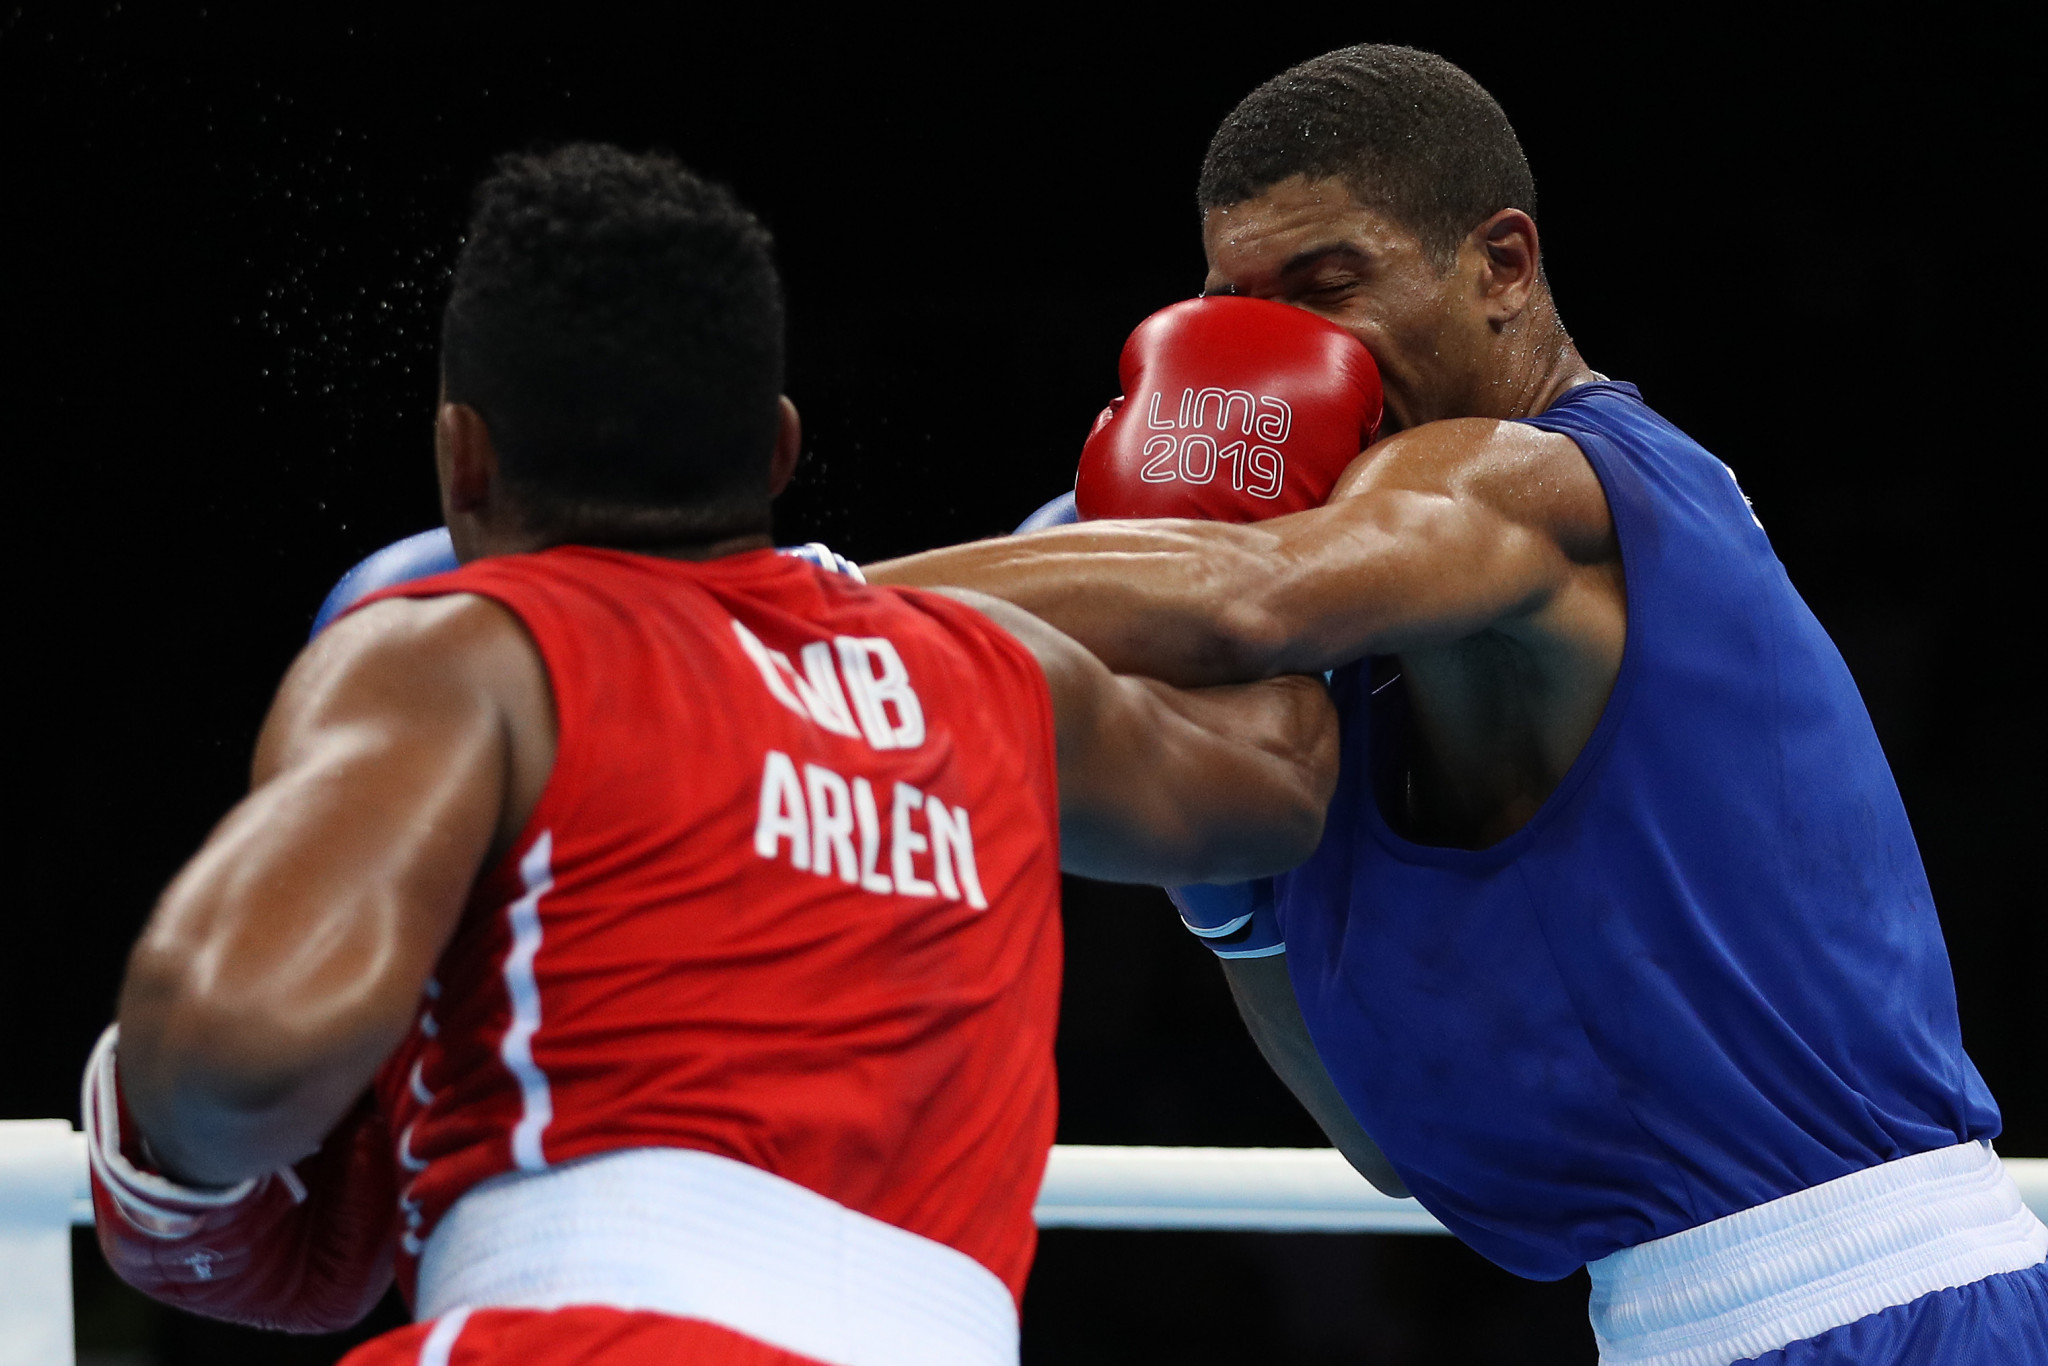 Cuba's Olympic champion Arlen Lopez defended his Pan American Games title ©Getty Images